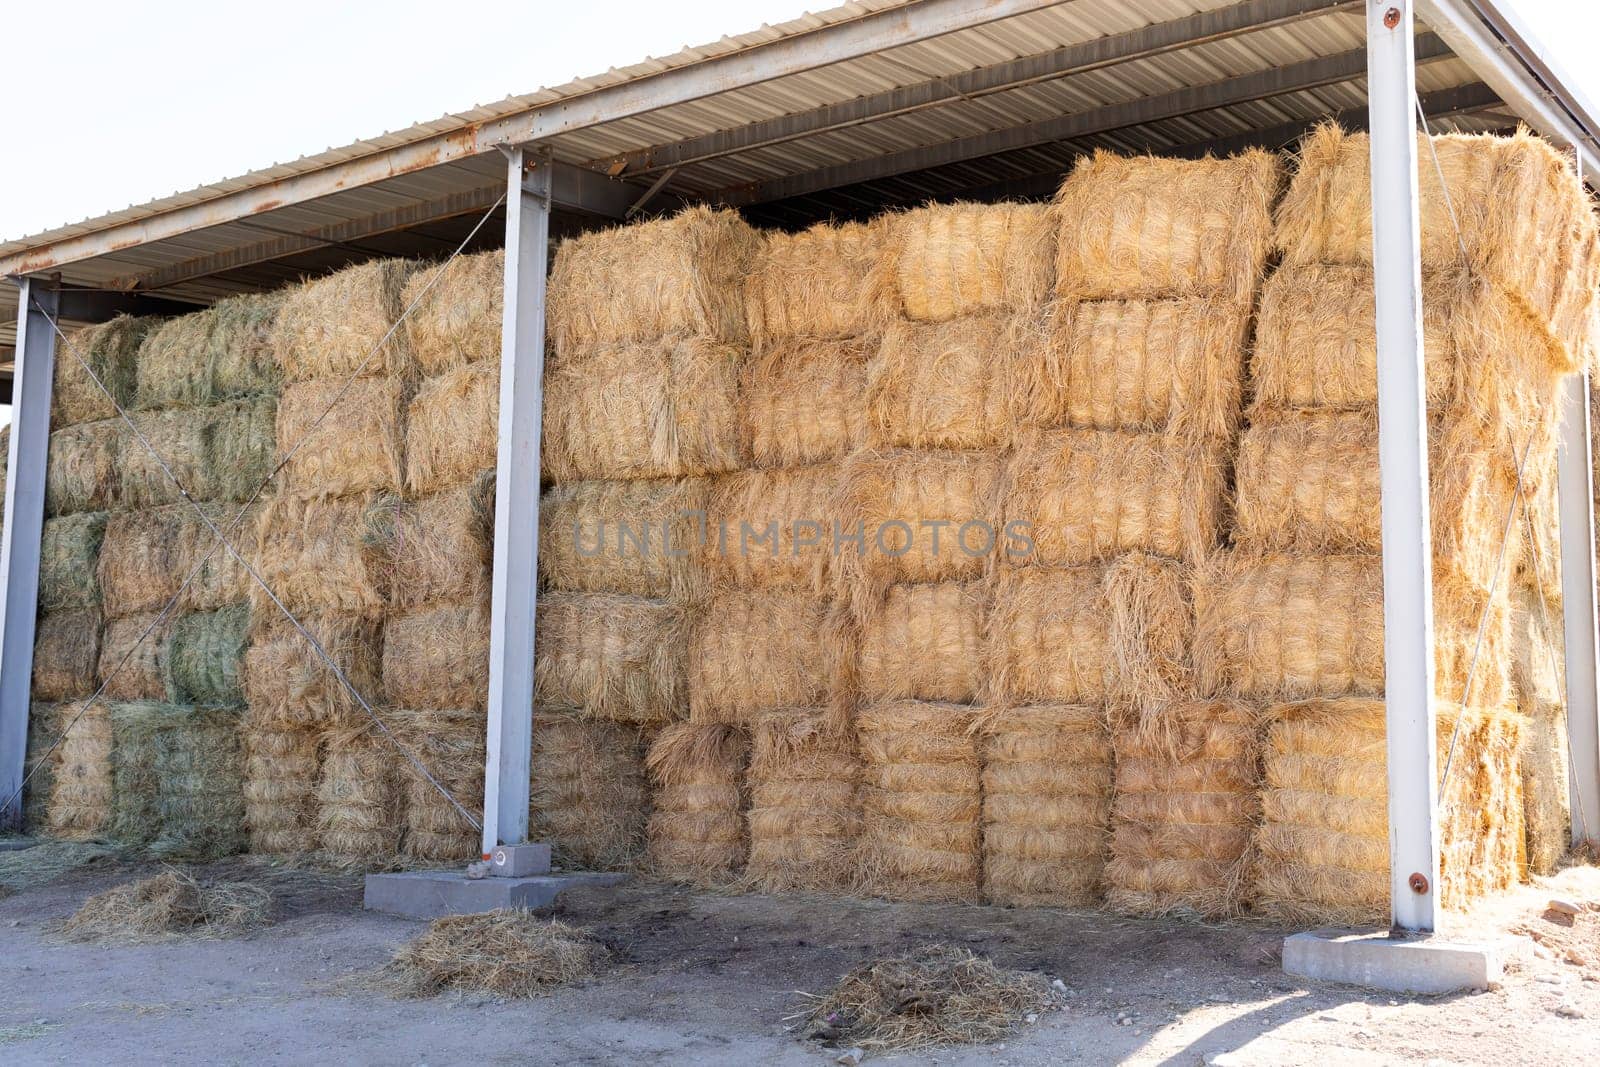 Barn, Hay Storage Shed Full Of Rolled Bales Hay On Farm, Agriculture And Livestock Farming. Agricultural Building, Farmyard Storage. Horizontal Plane by netatsi